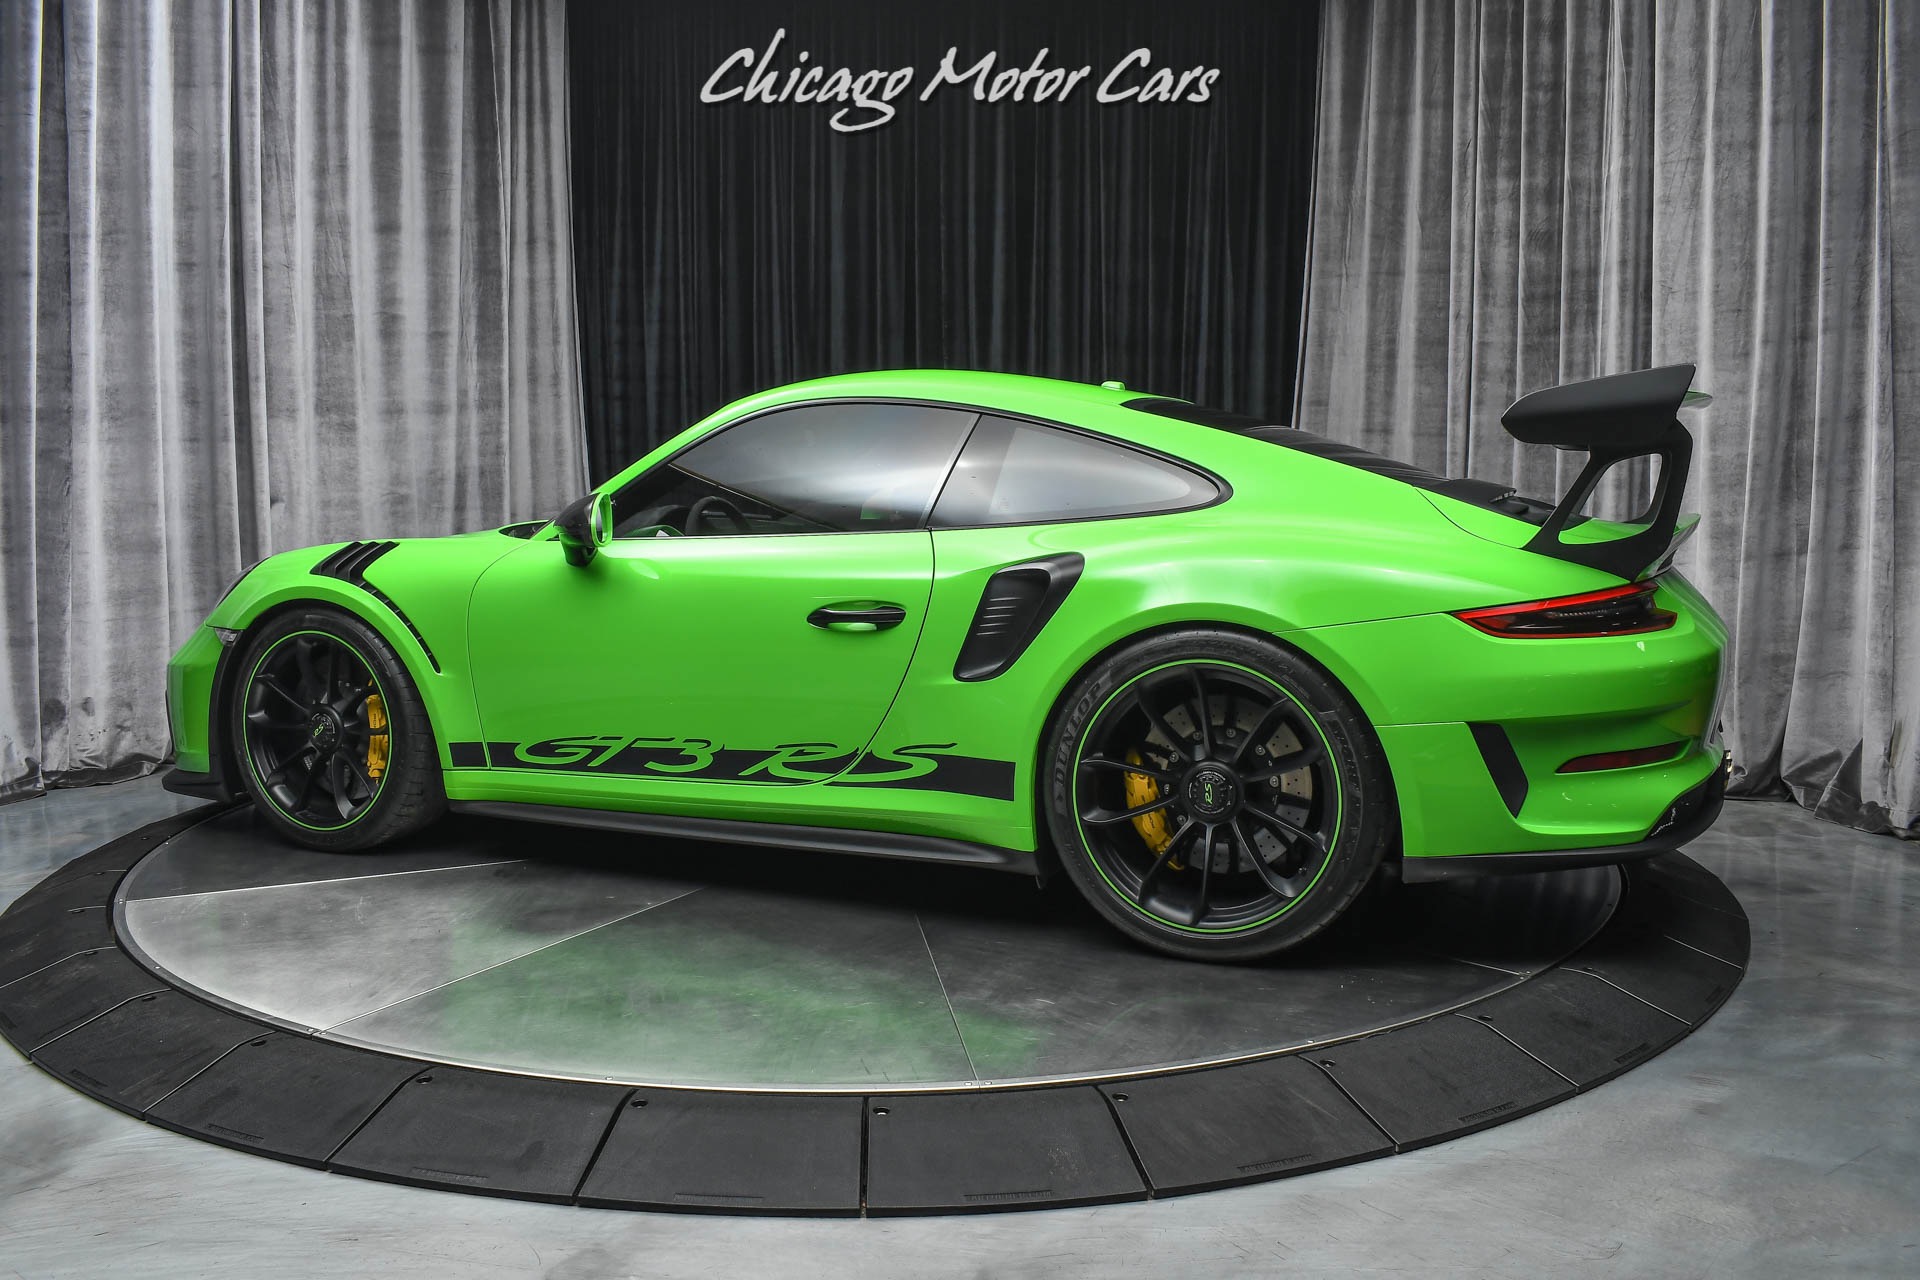 Used-2019-Porsche-911-GT3-RS-HUGE-Option-List-FABSPEED-Exhaust-System-PCCB-5k-Miles